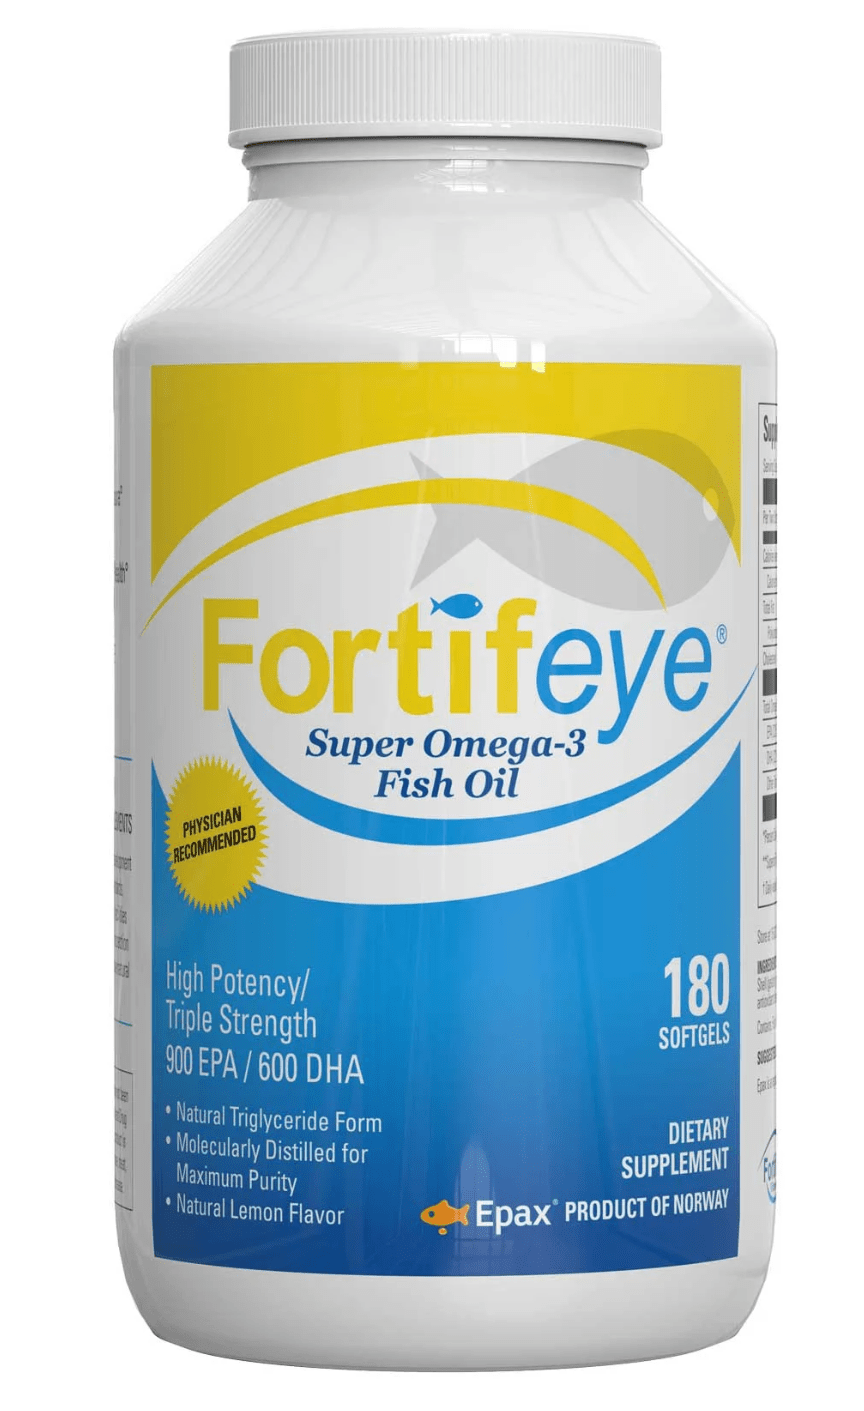 Fortifeye Super Omega-3 Fish Oil for Dry Eye Relief (180ct 3 Month Supply) - Dryeye Rescue